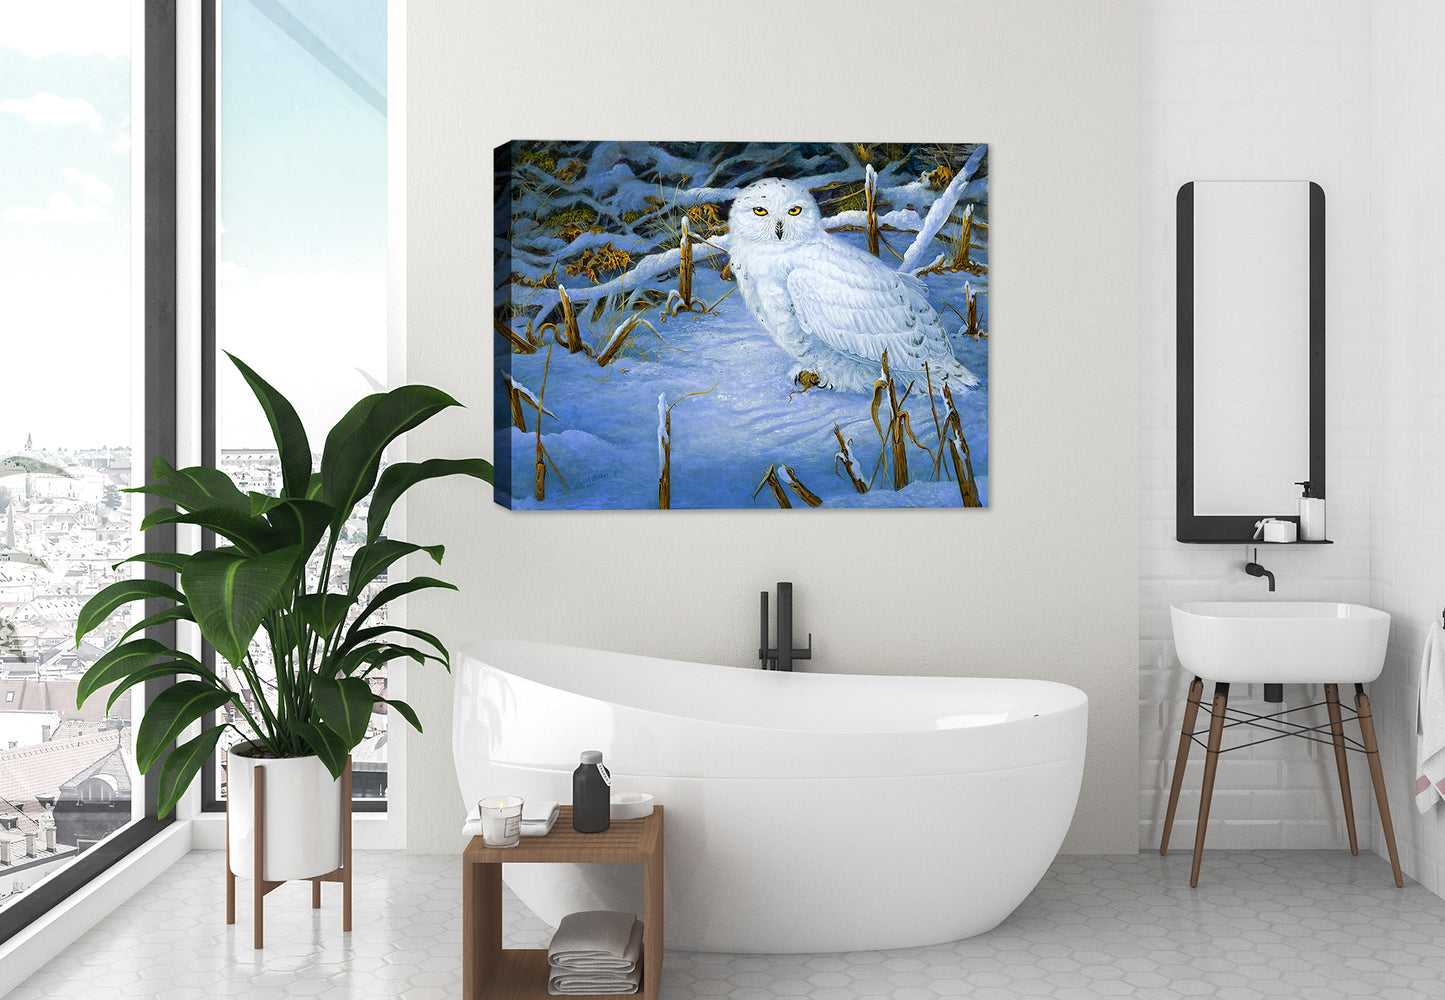 Owl Painting on Canvas in Bathroom